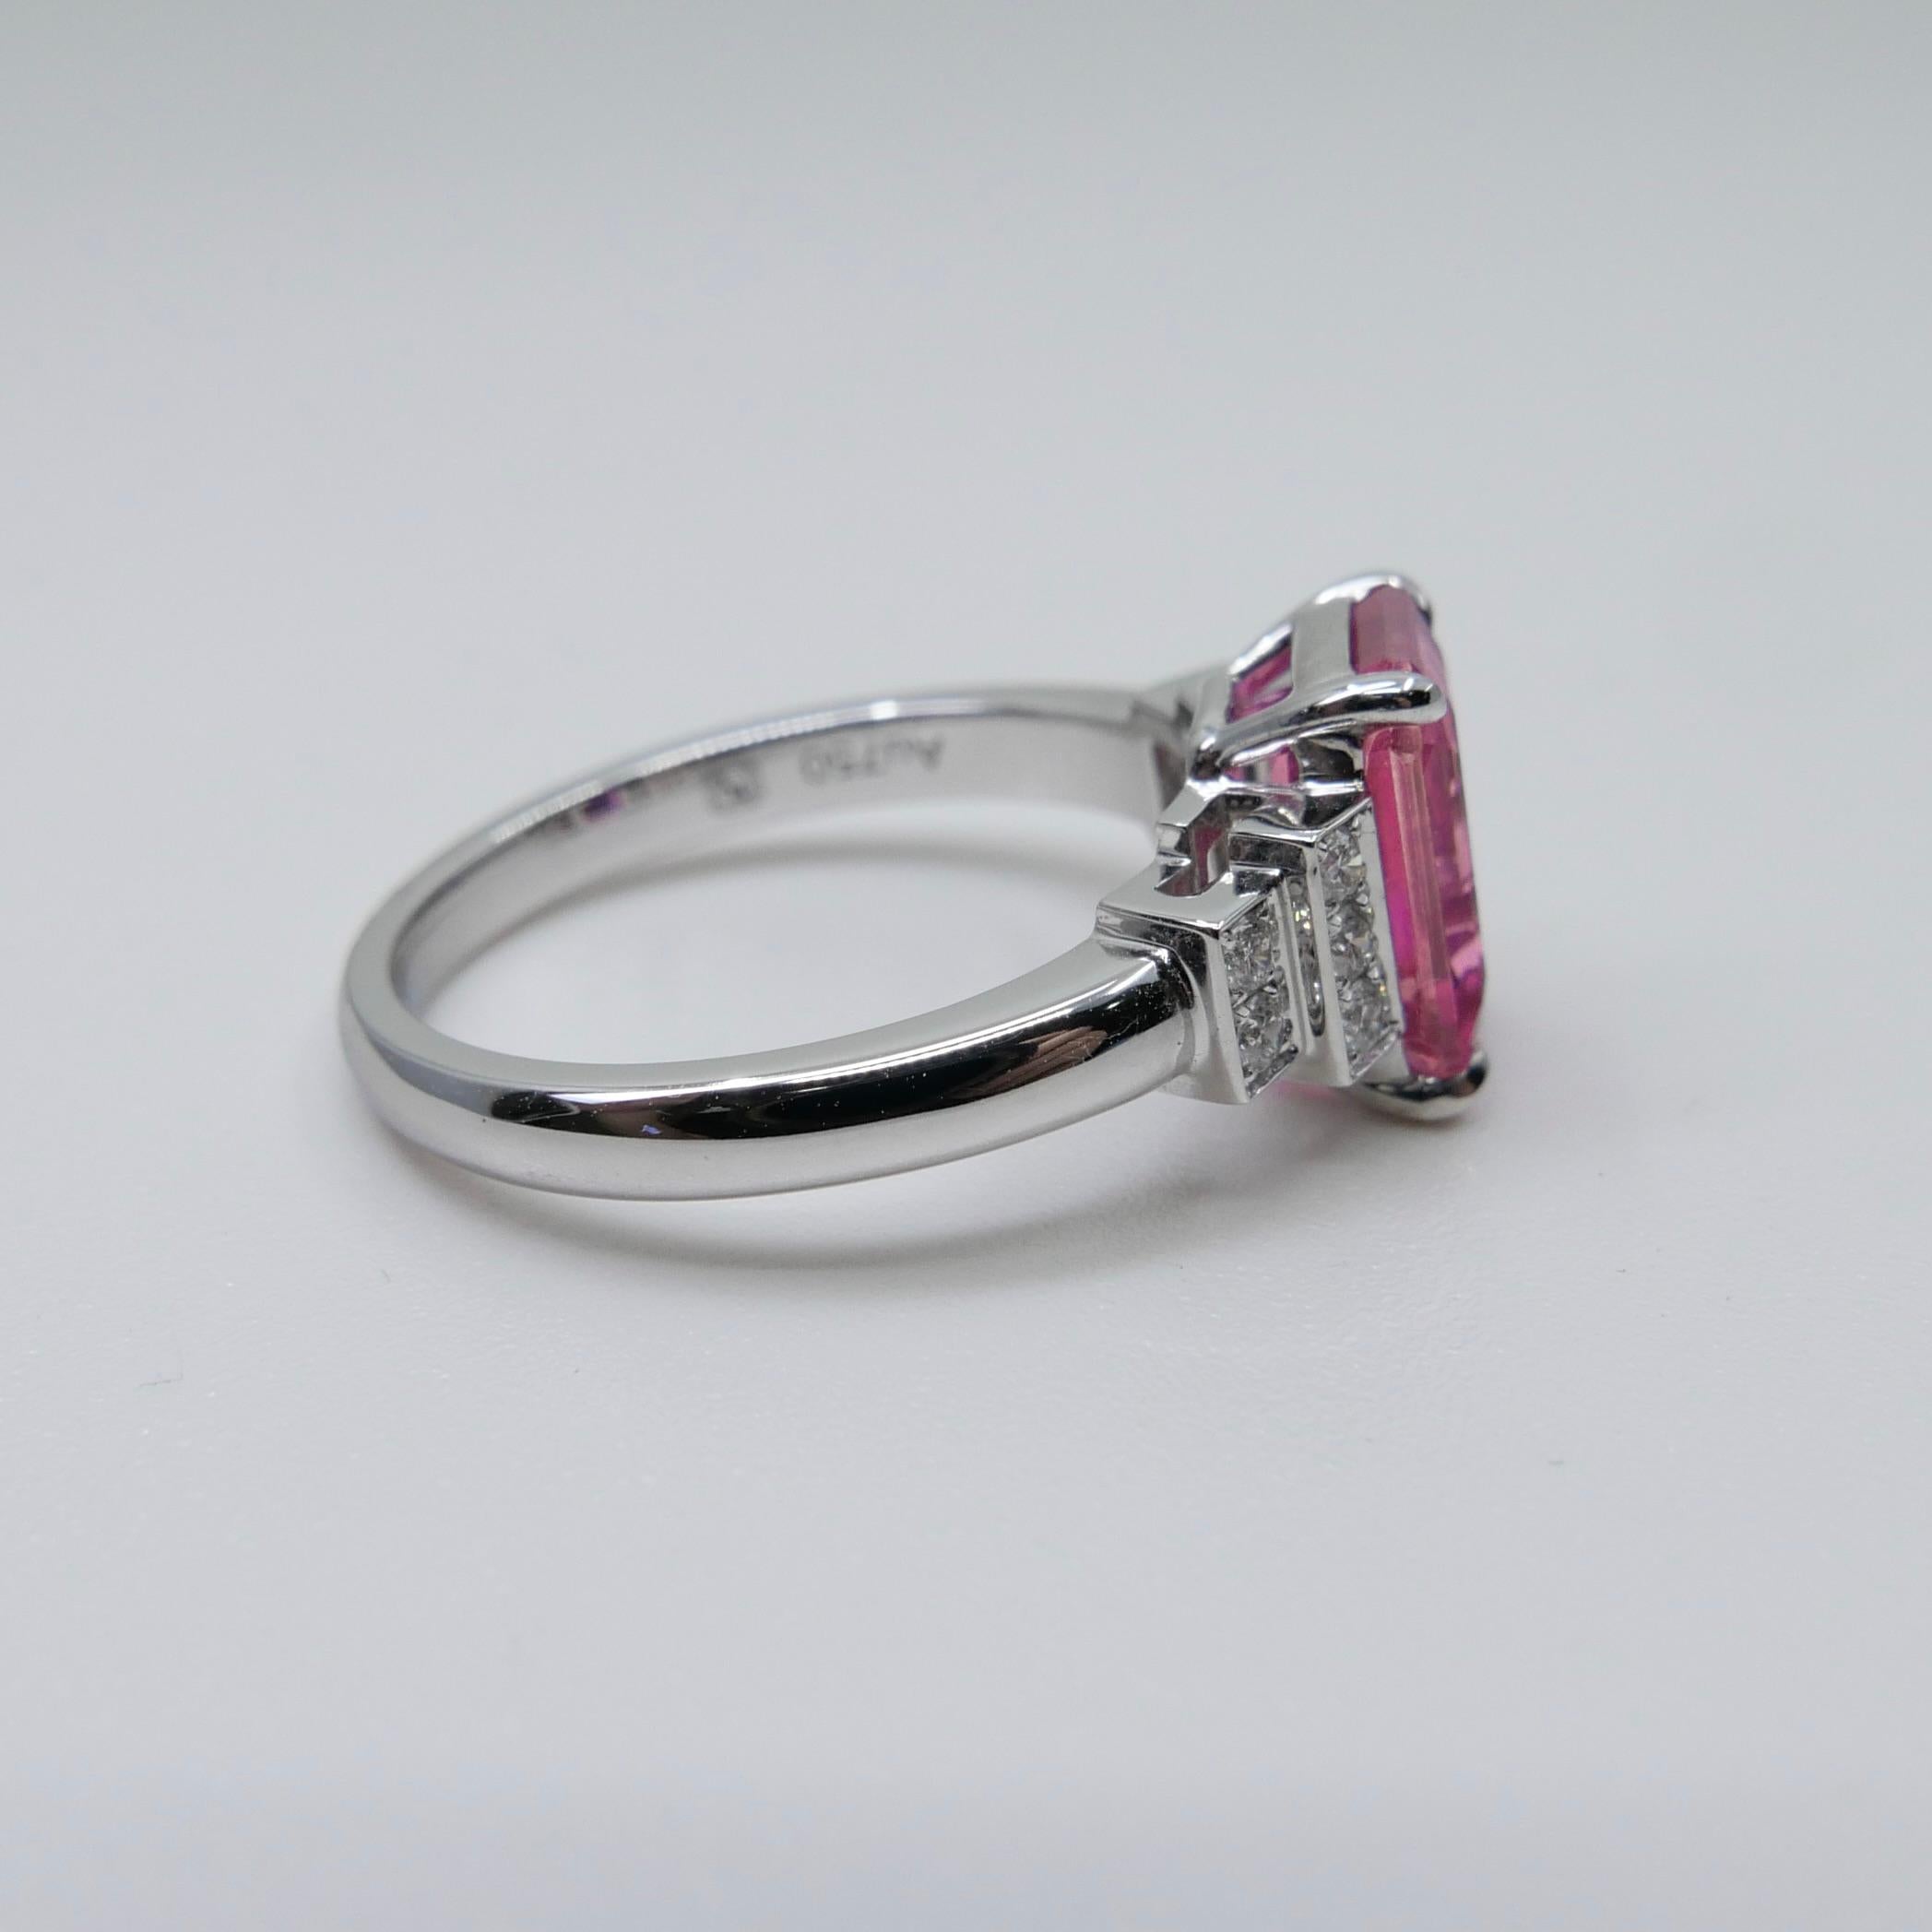 GRS Certified 3.11 Cts No Heat Pink Sapphire & Diamond Ring. Art Deco Style 8